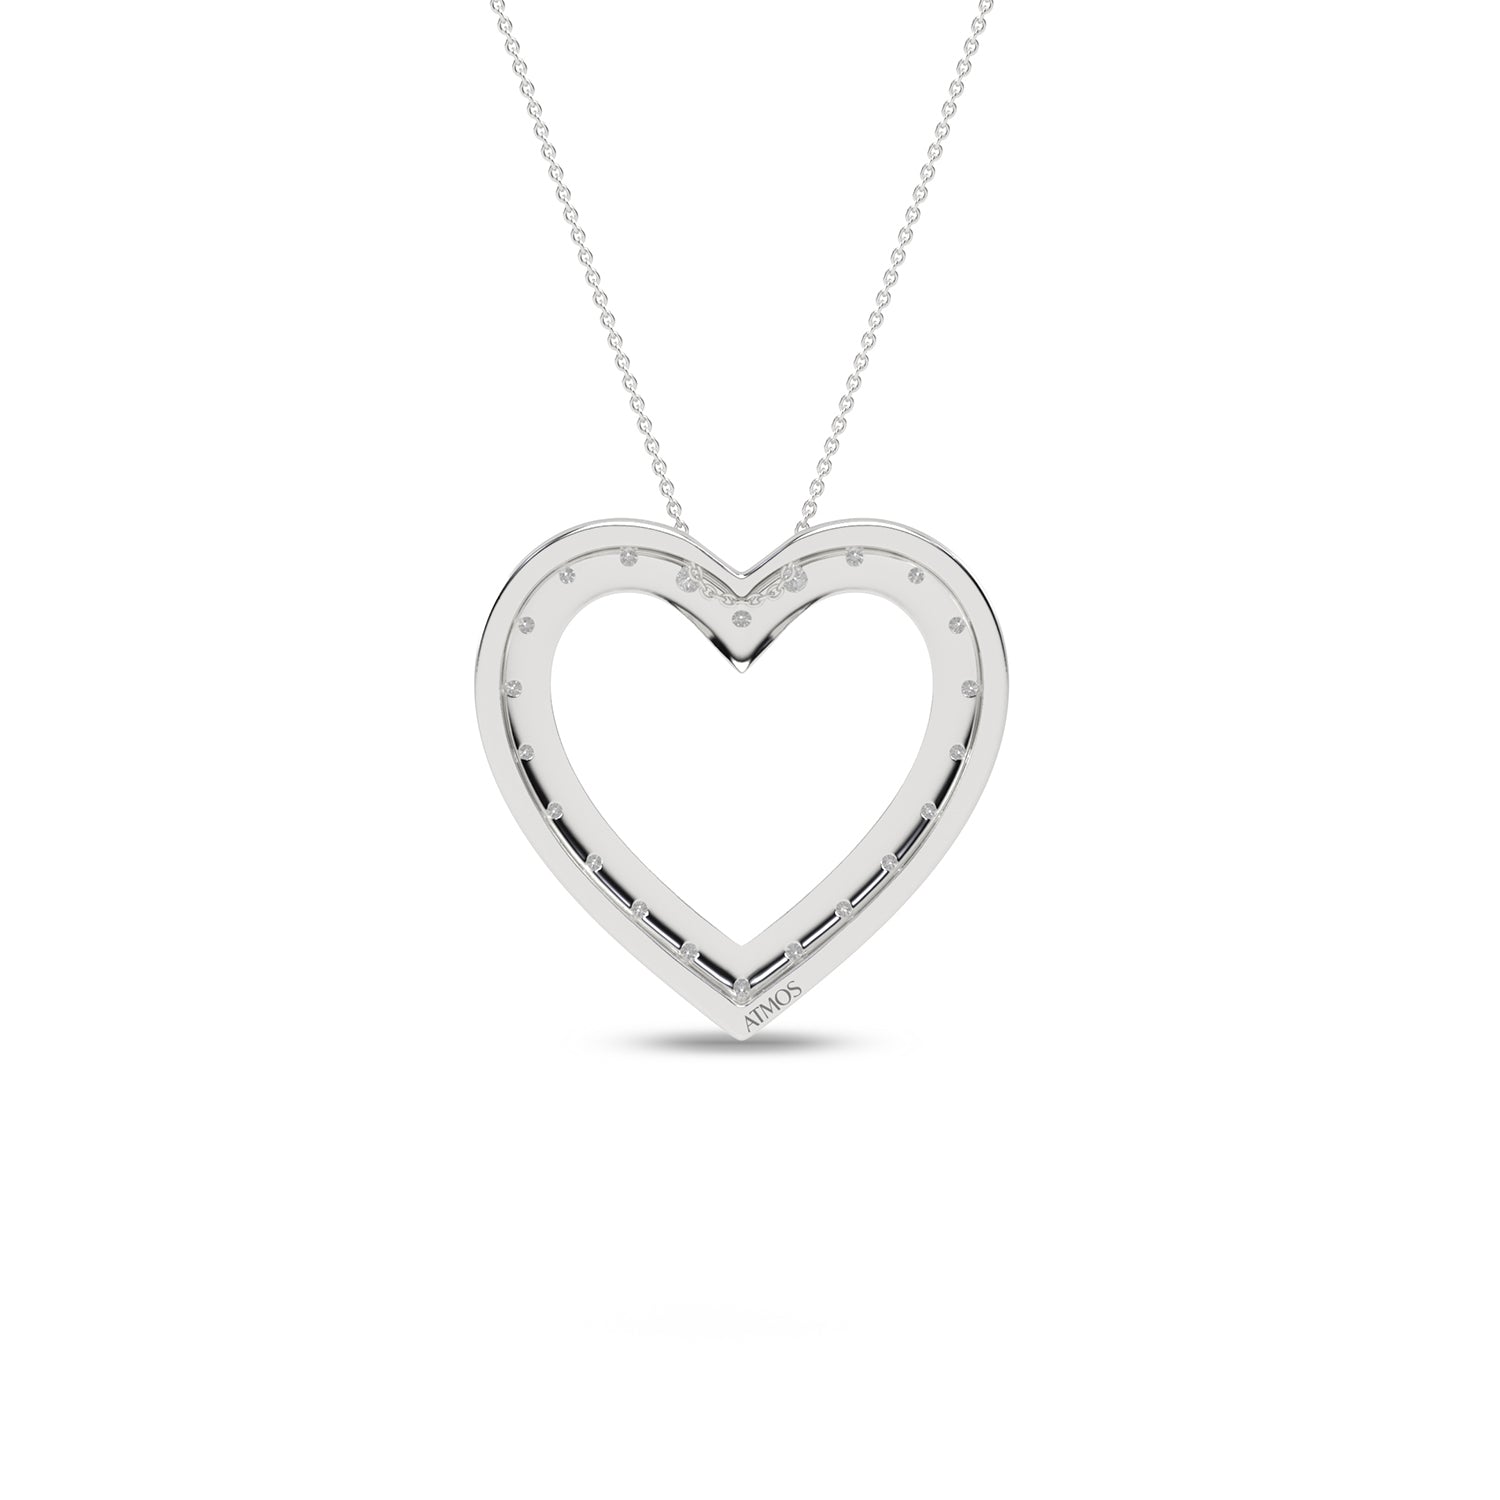 Atmos Heart Silhouette Necklace_Product Angle_1/2 Ct. - 3